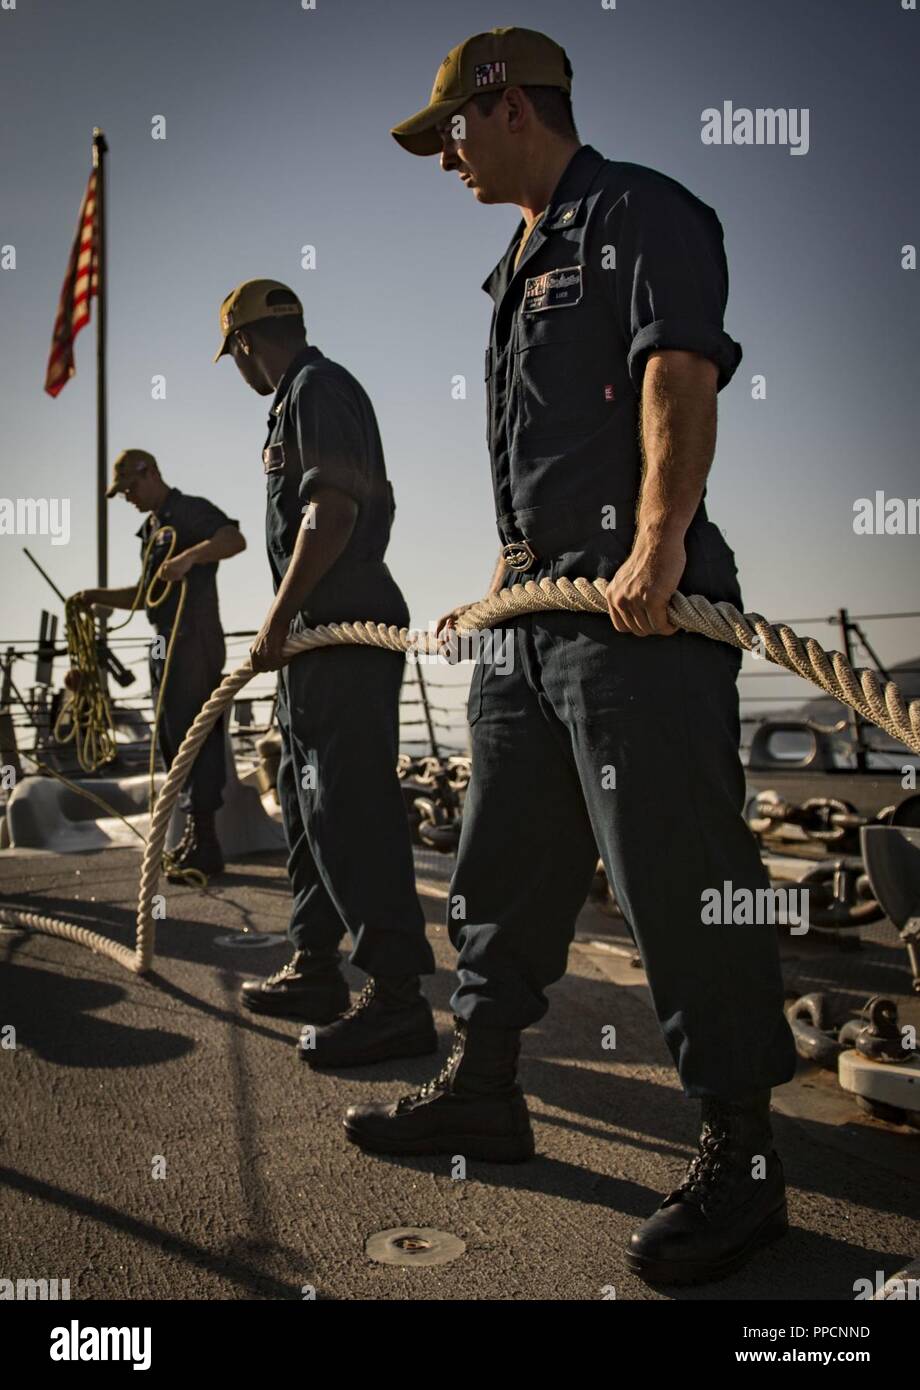 BAY, Greece (Sept. 2, 2018) Sailors handle line aboard the Arleigh Burke-class guided-missile destroyer USS Carney (DDG 64) as the ship arrives in Souda Bay, Greece, Sept. 2, 2018. Carney, forward-deployed to Rota, Spain, is on its fifth patrol in the U.S. 6th Fleet area of operations in support of regional allies and partners as well as U.S. national security interests in Europe and Africa. Stock Photo